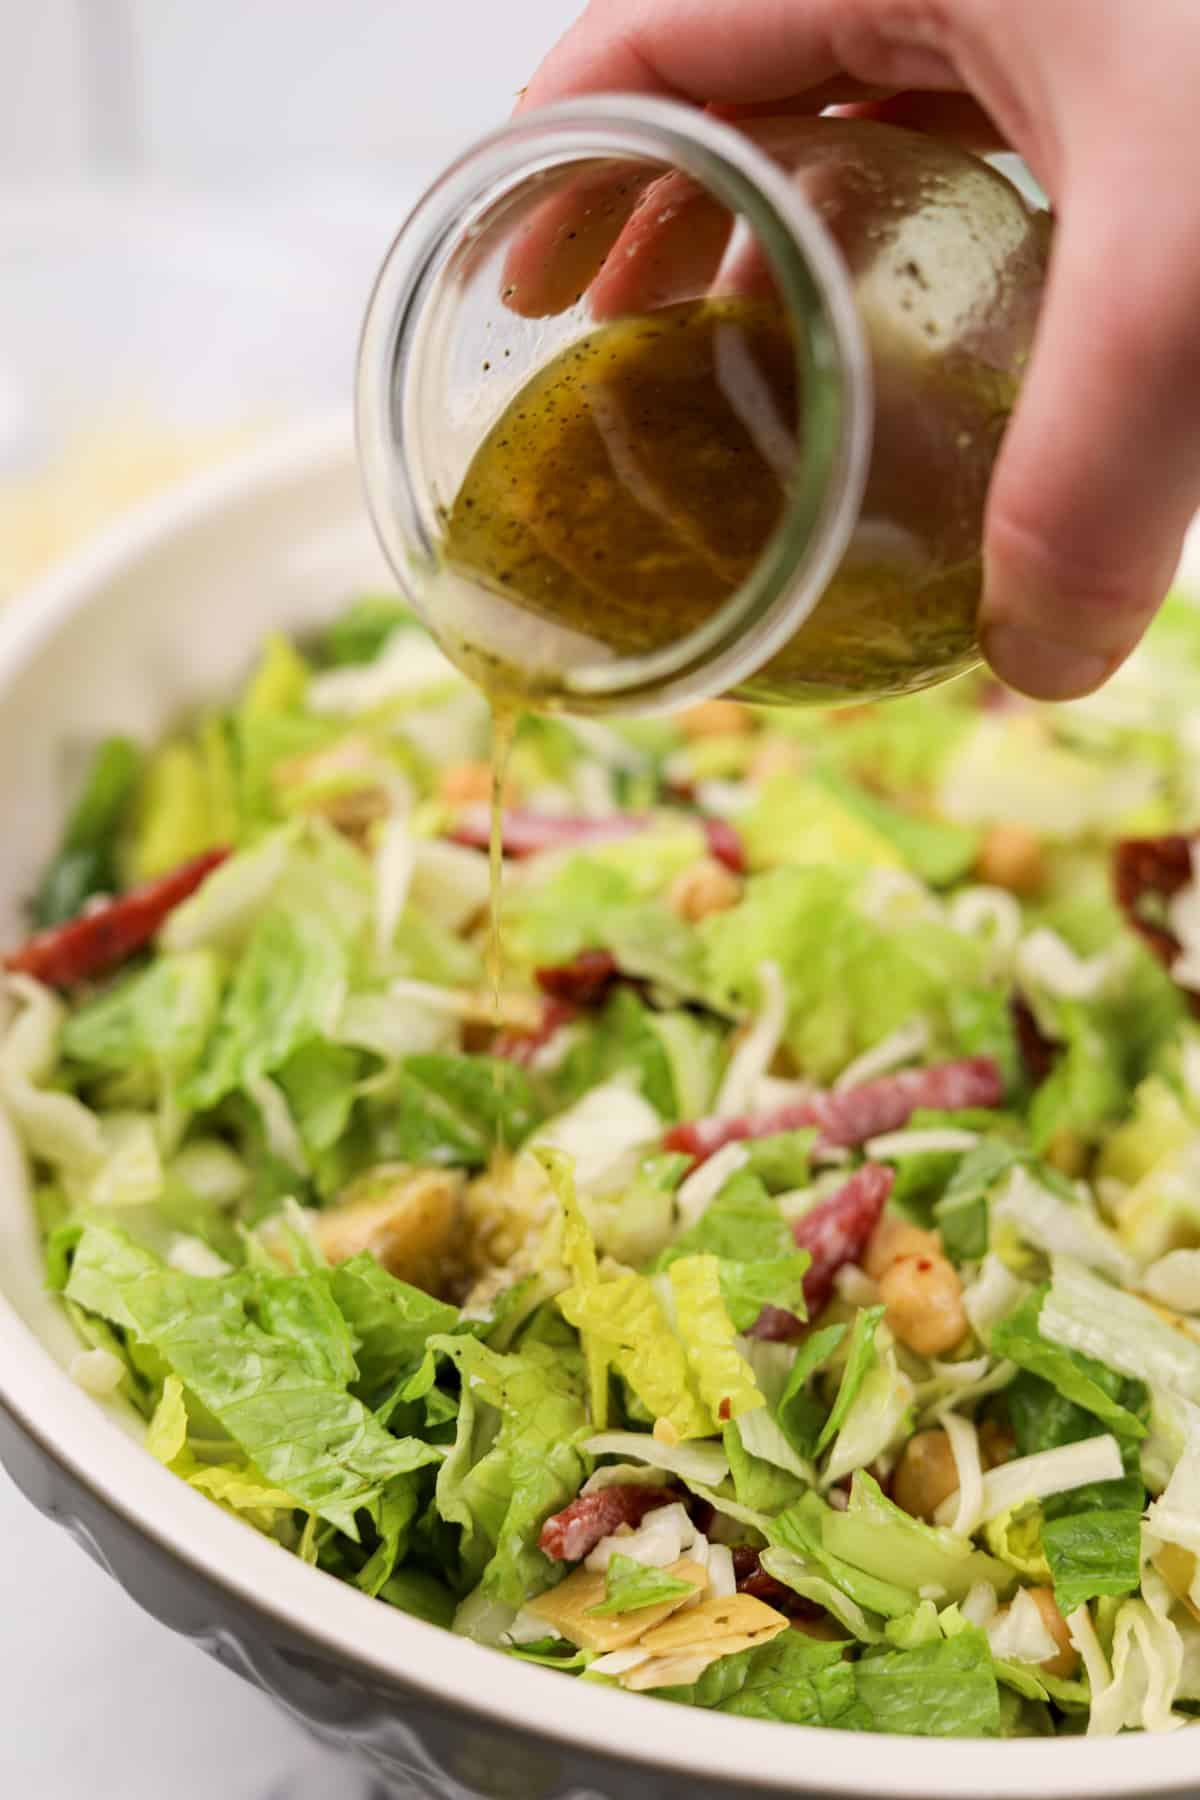 Pouring salad dressing over a chopped salad.